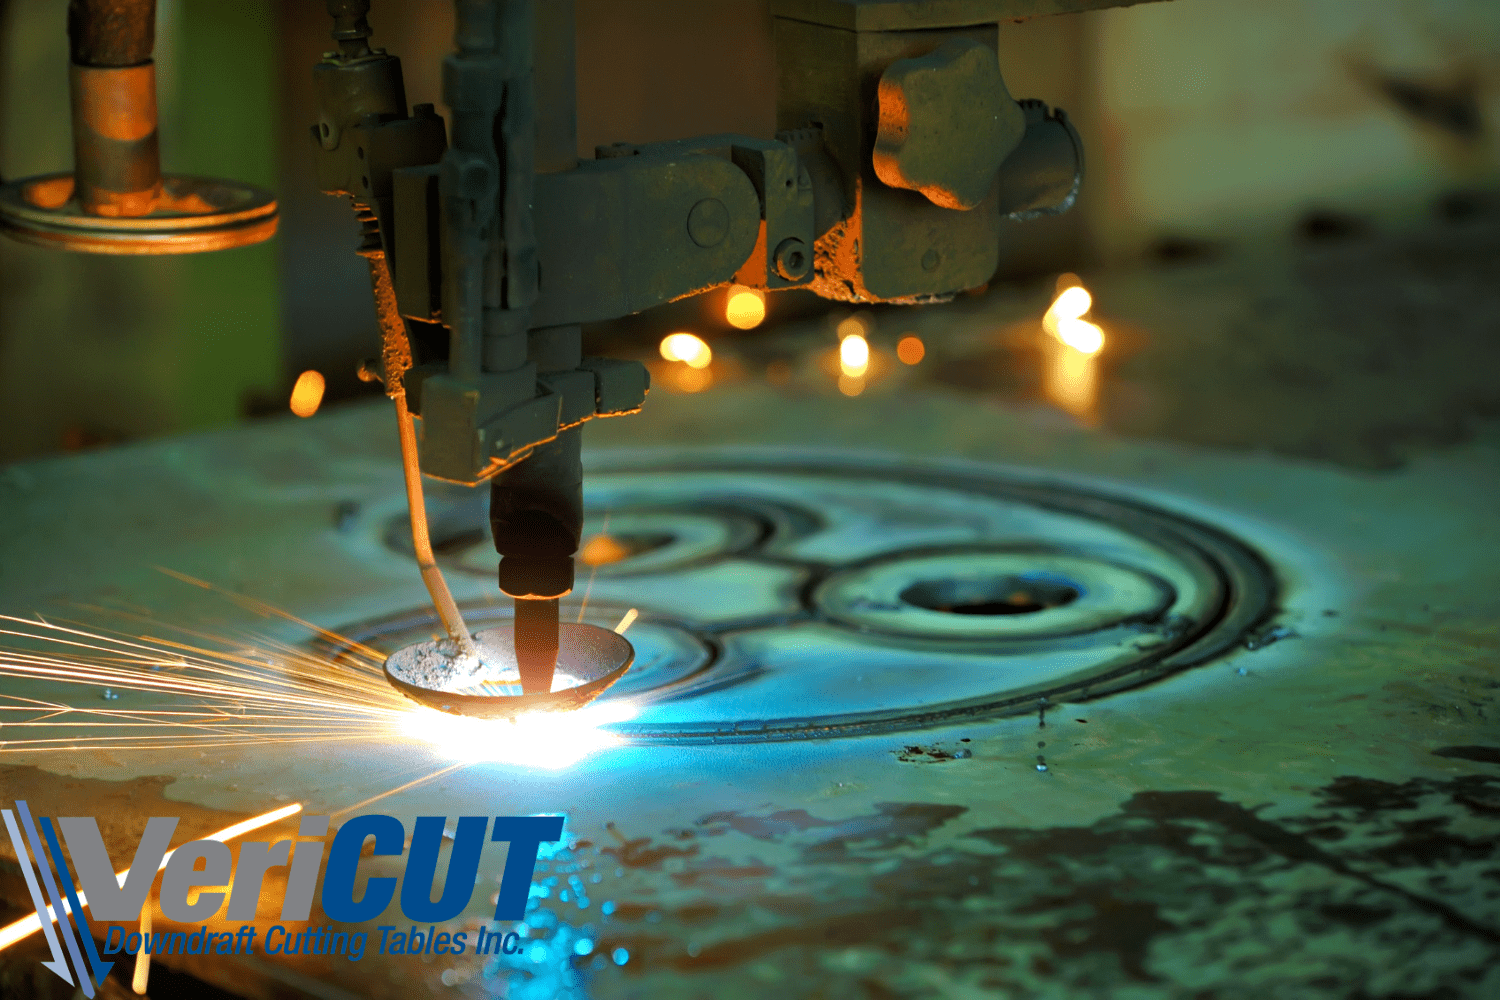 _Plasma Cutting and Downdraft Tables_